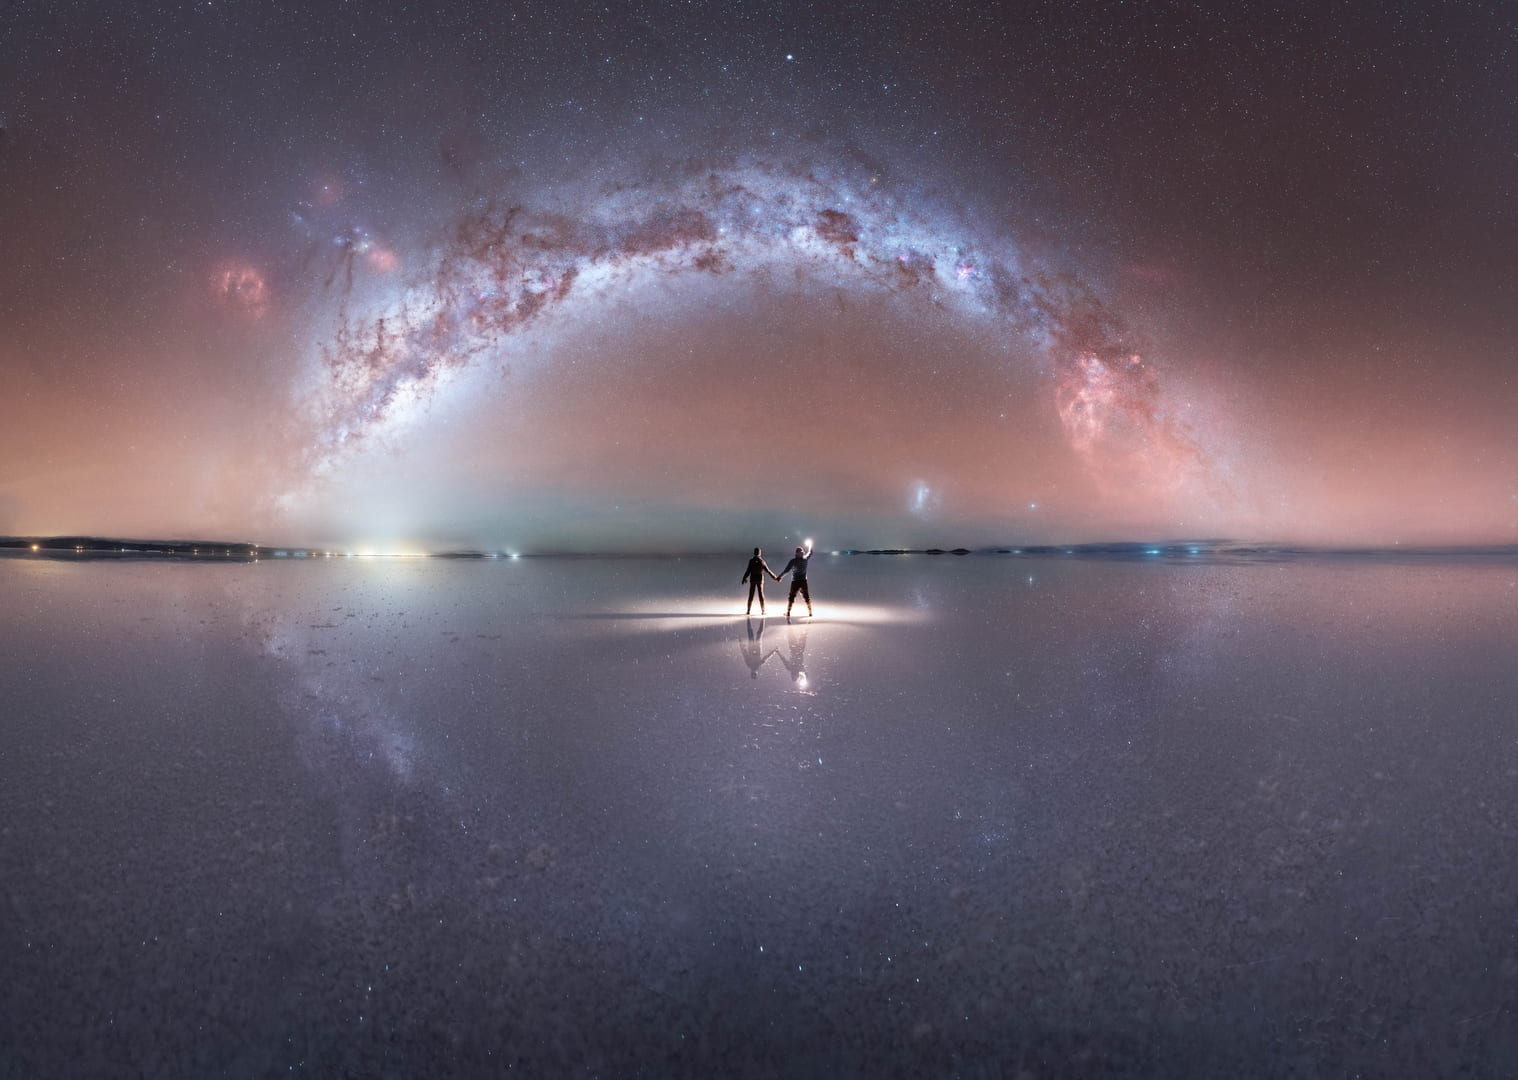 Best ISO for Milky Way photography